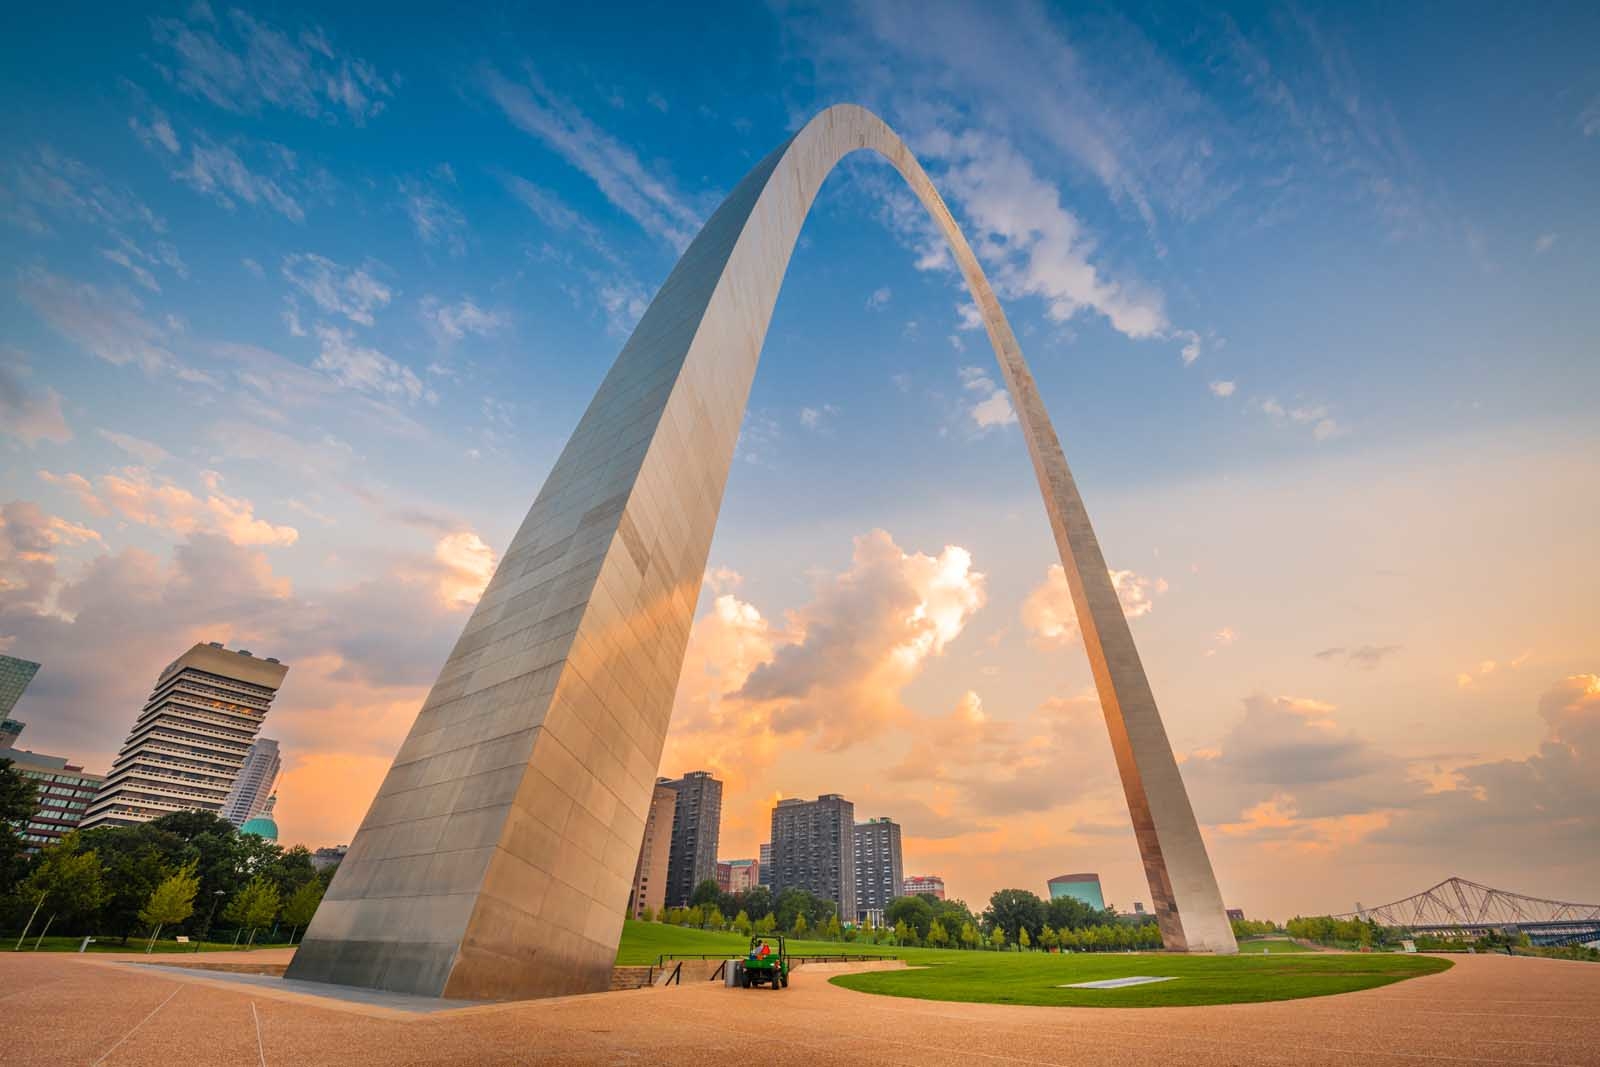 Best Things to do in St. Louis Missouri